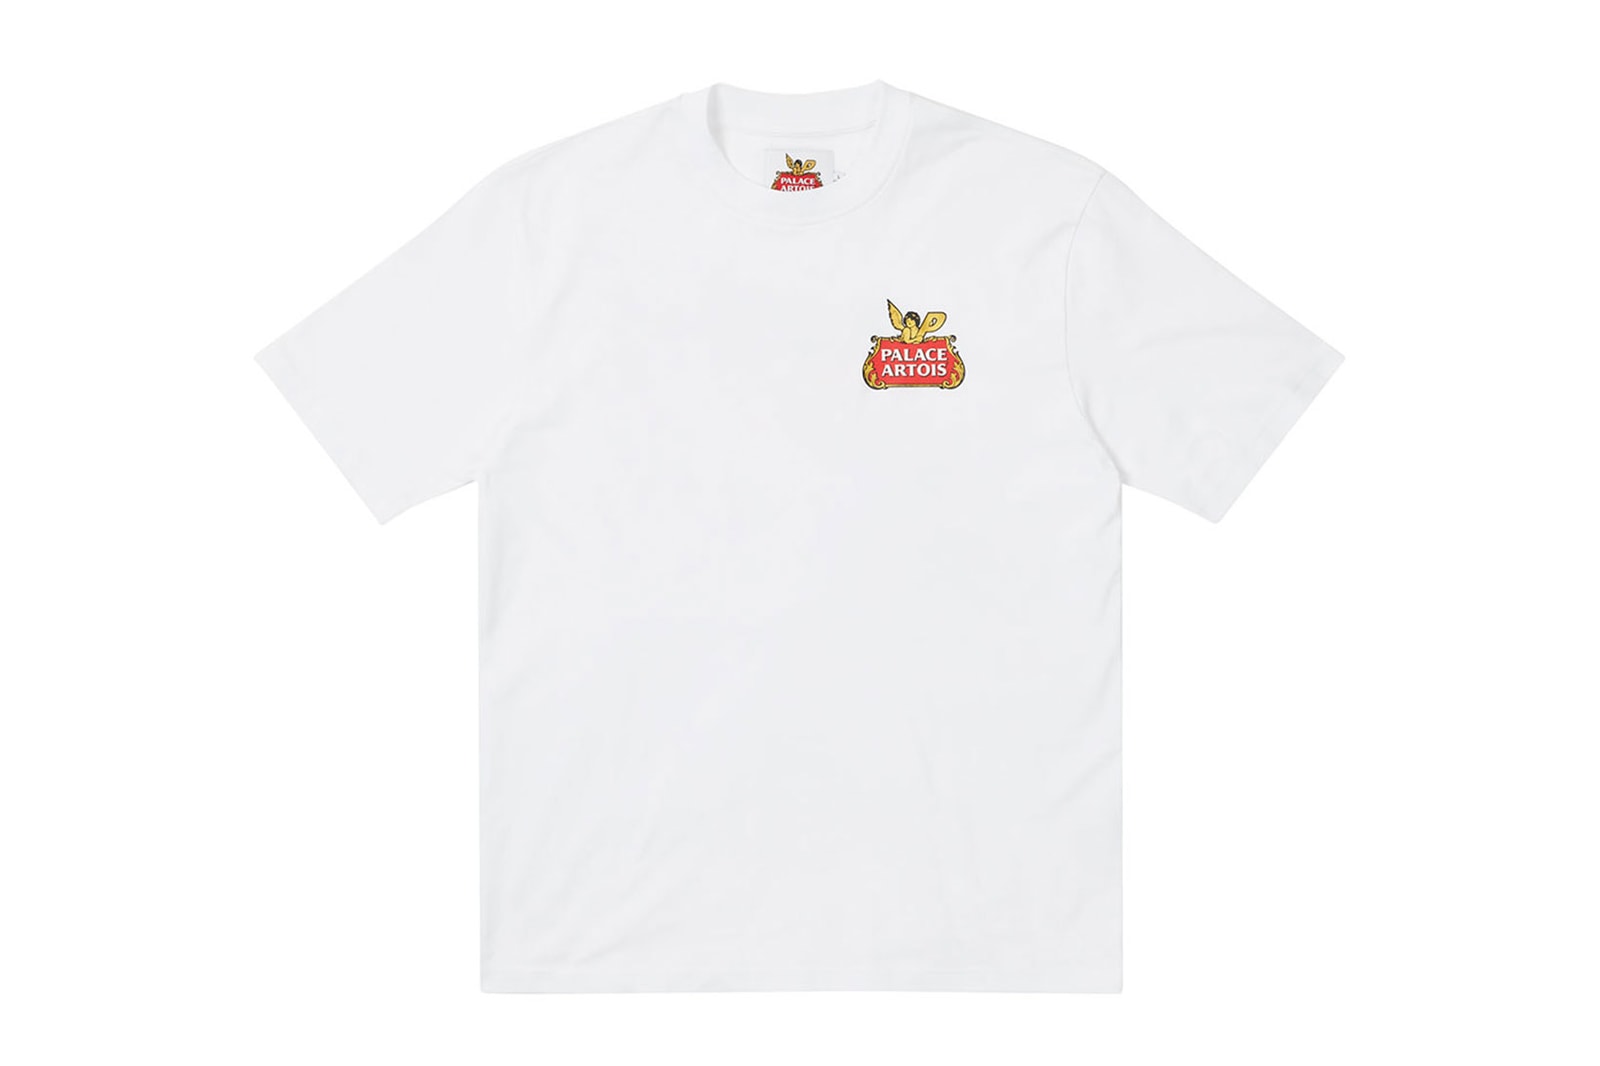 palace skateboards stella artois beer collaboration logo t-shirts hoodies home accessories release date info